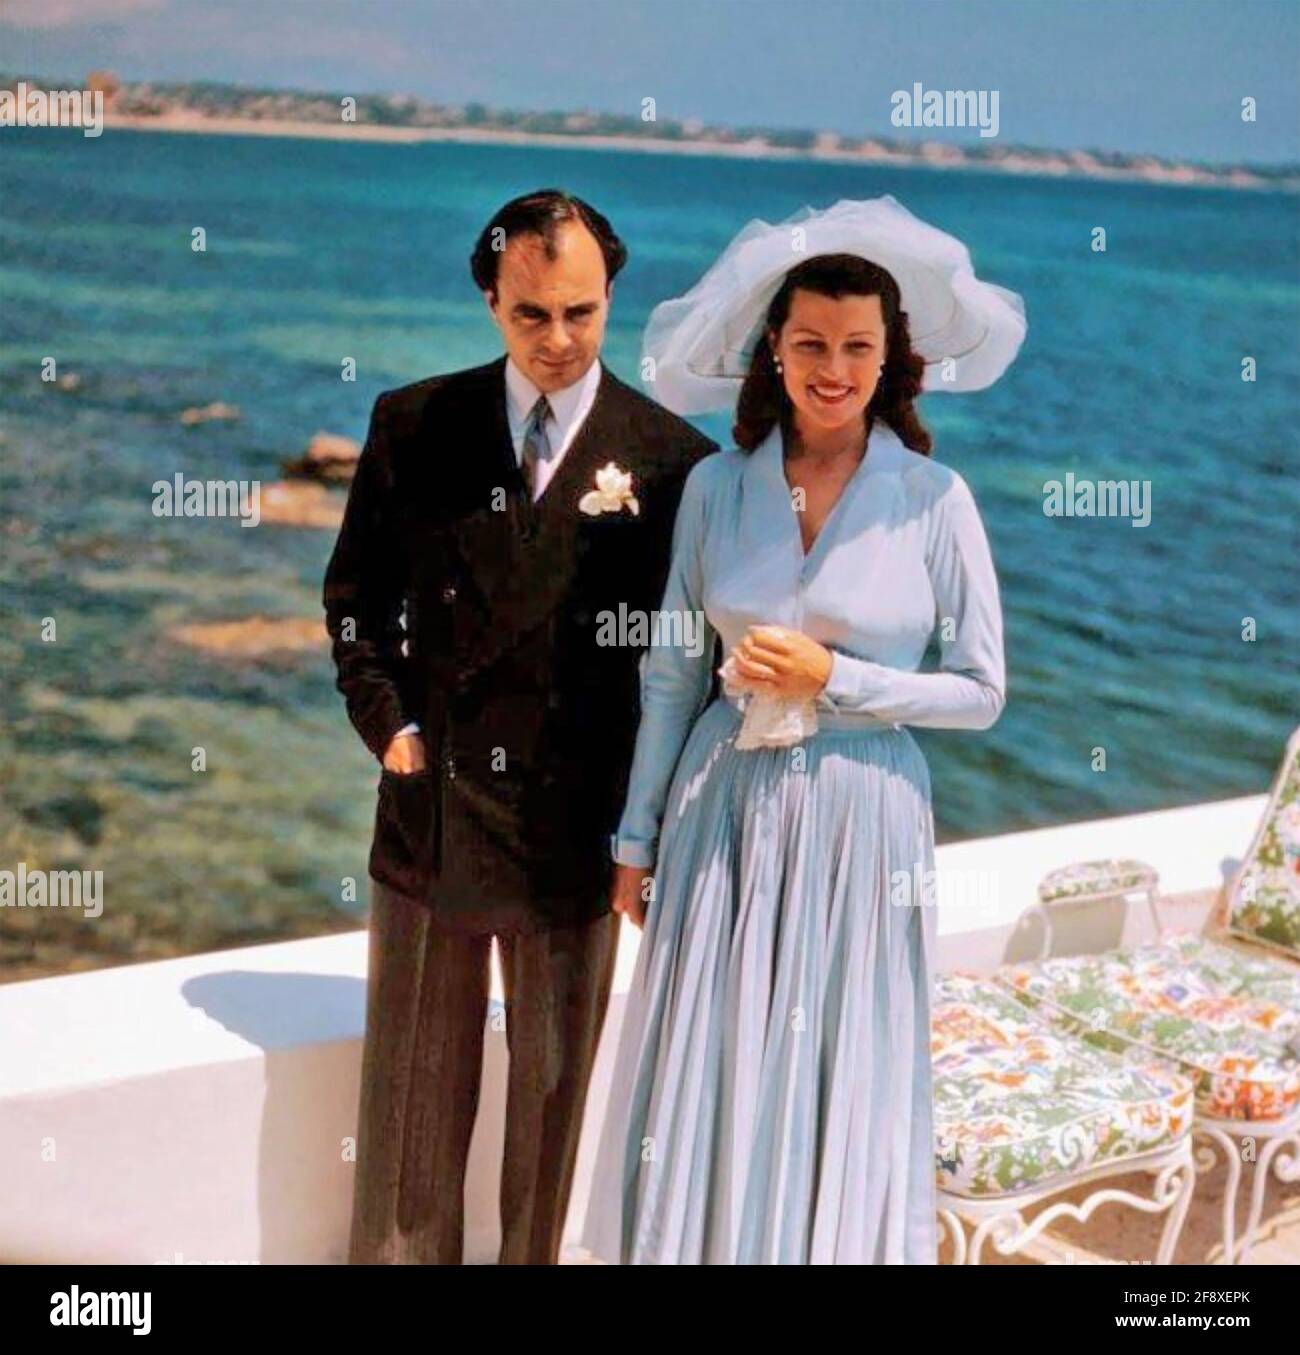 RITA HAYWORTH American film actress with her third husband Prince Aly Khan at their wedding reception in the garden of the Château de l'Horizon near Cannes on 27 May 1949 Stock Photo